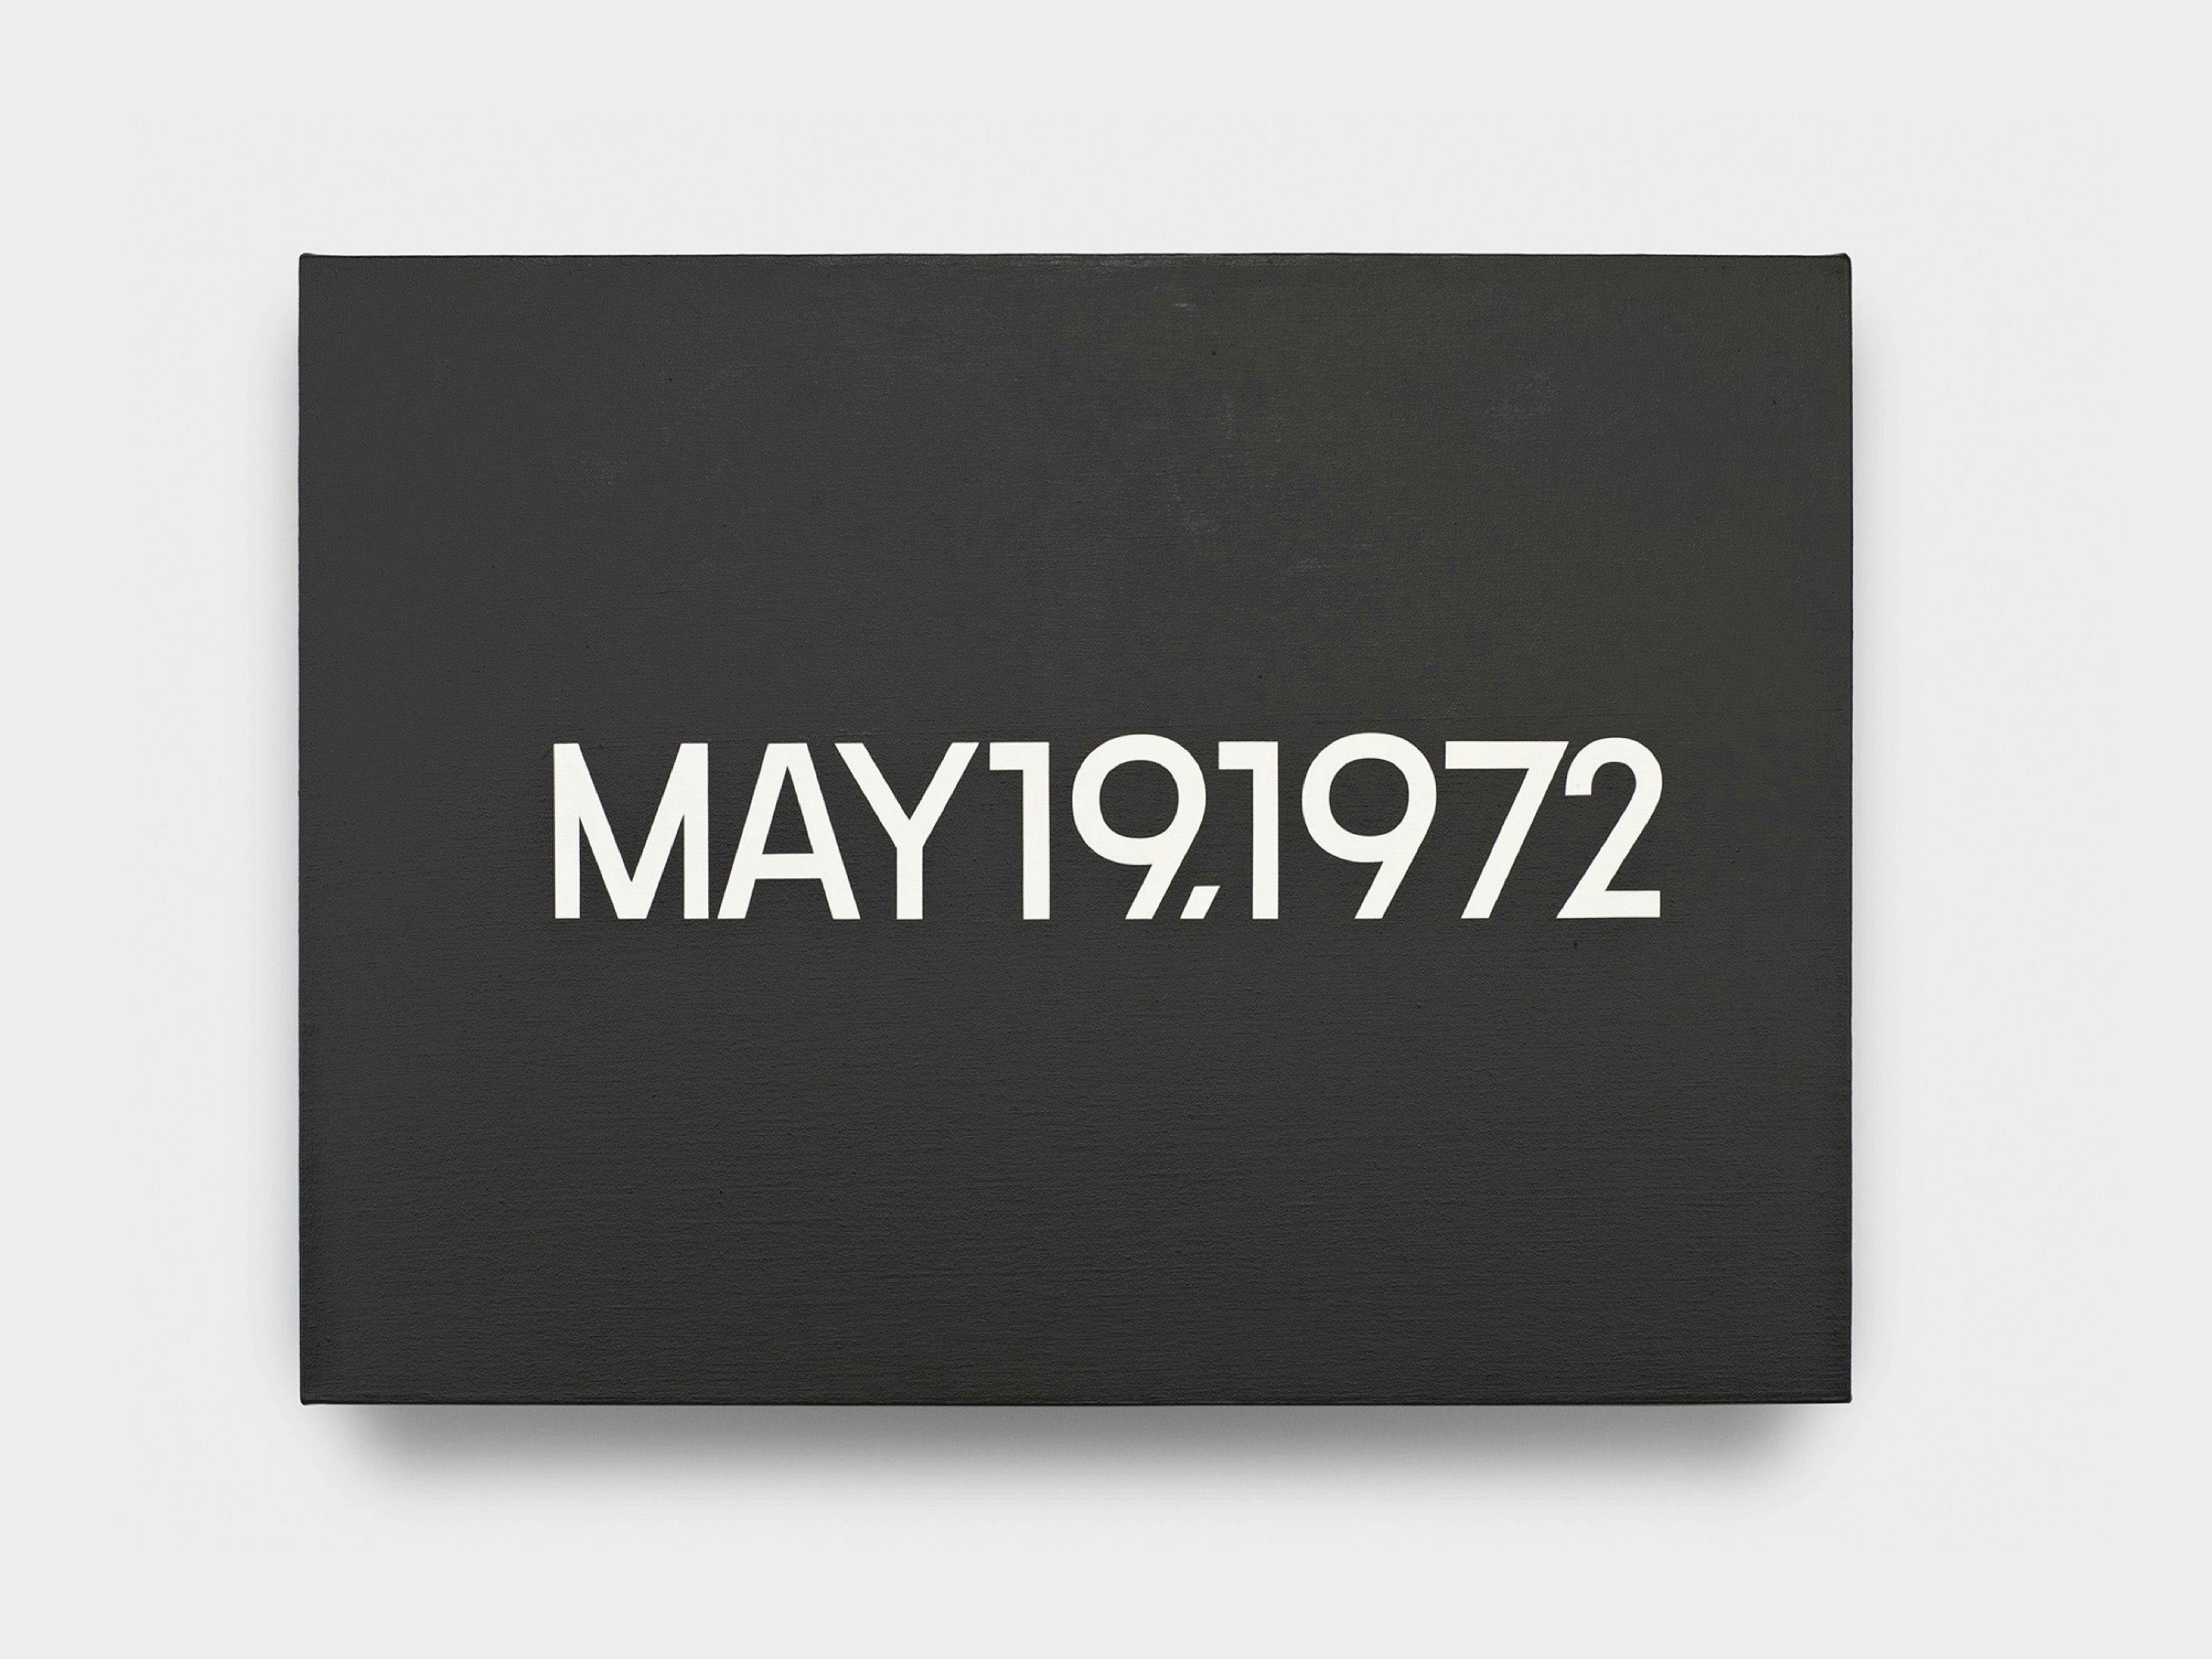 A painting by On Kawara, titled MAY 19, 1972, dated 1972.